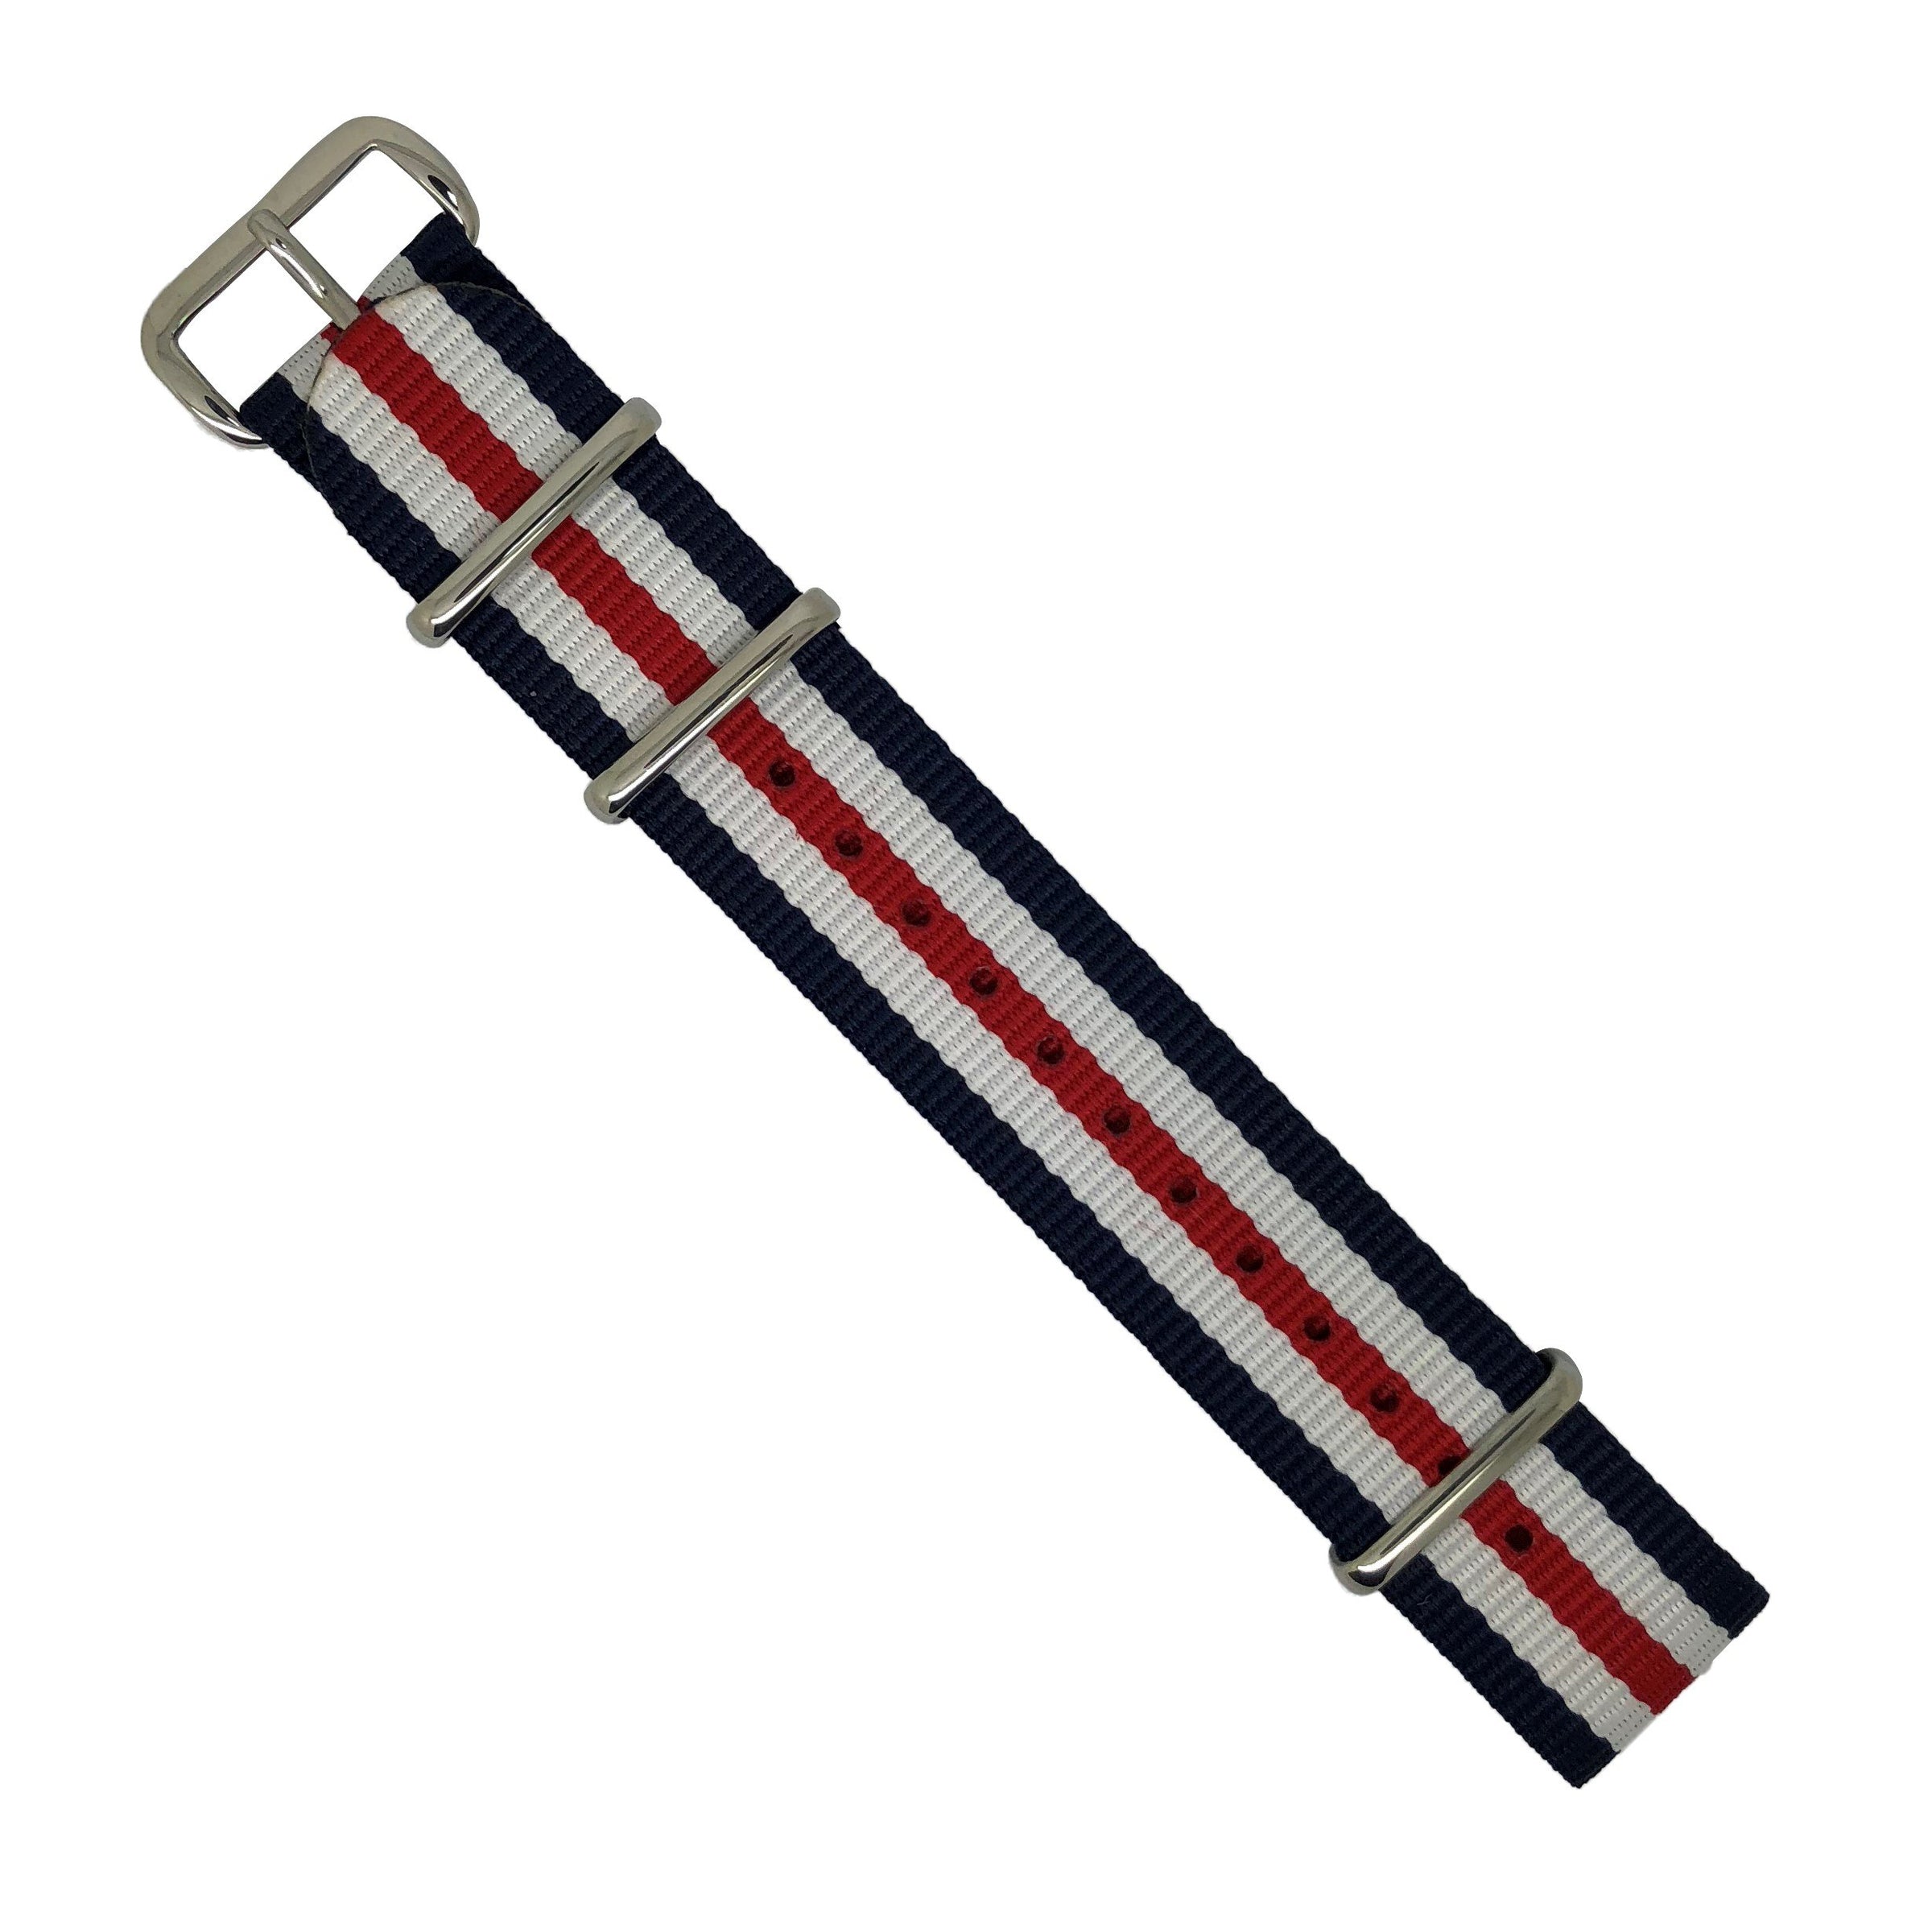 Premium Nato Strap in Regimental with Polished Silver Buckle (18mm) - Nomad Watch Works Malaysia